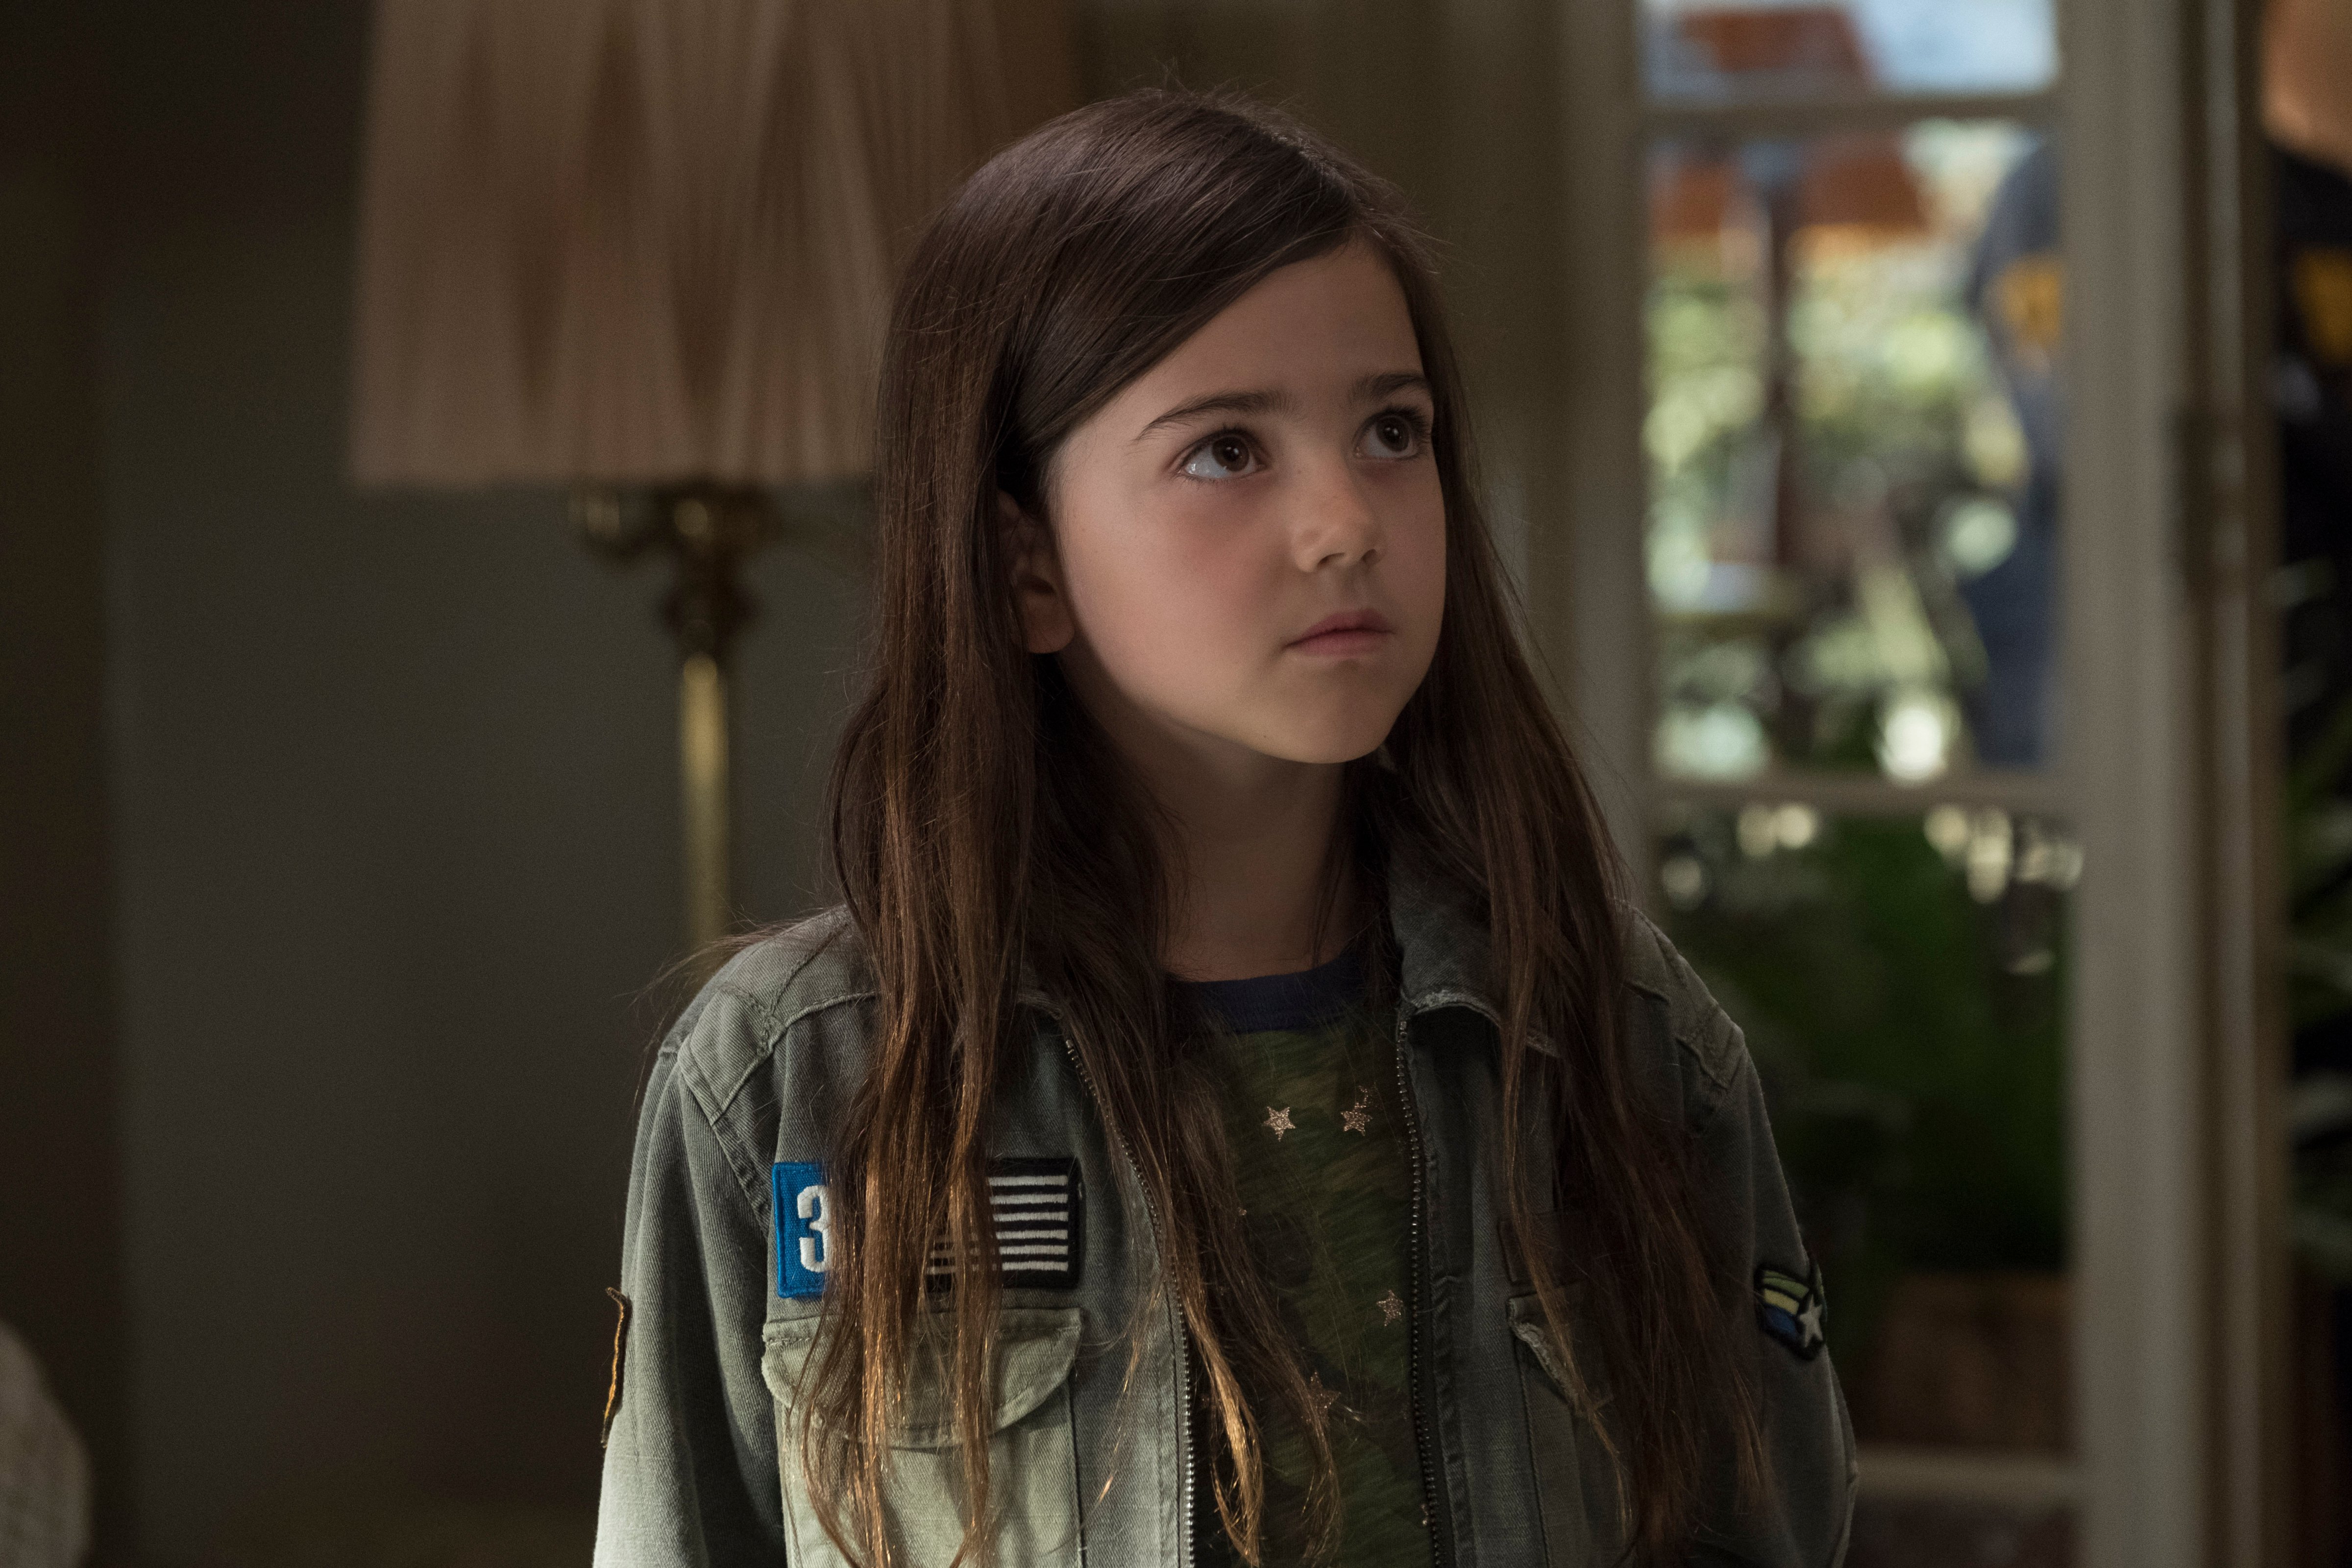 Abby Ryder Fortson as Cassie Lang in <i>Ant-Man and the Wasp</i>. (Ben Rothstein—Marvel Studios)